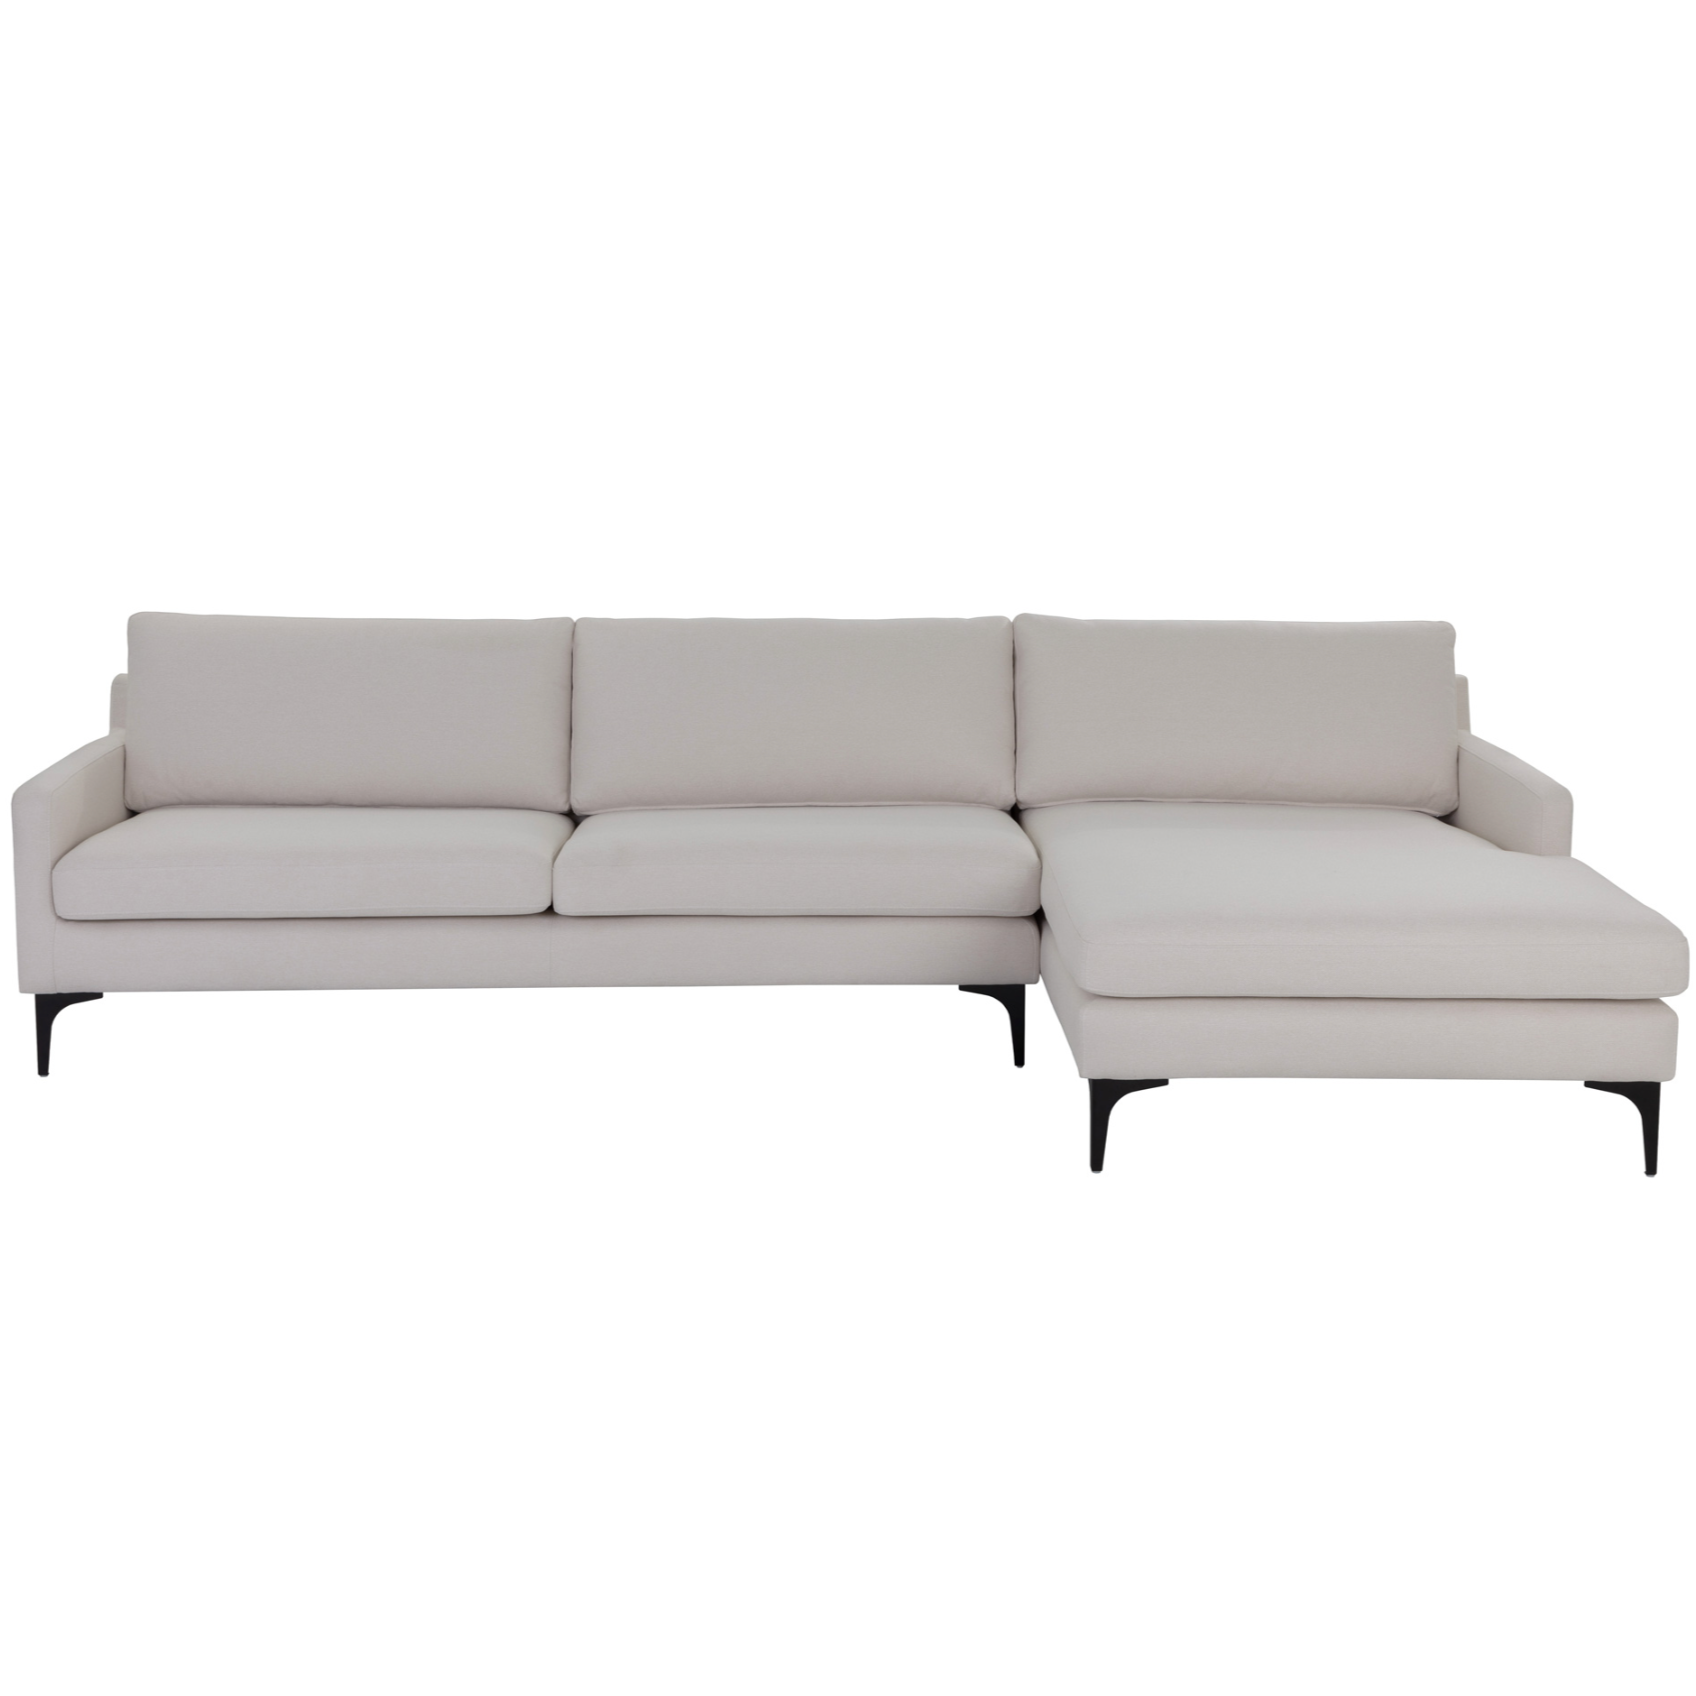 Andie Sofa - Right Facing Chaise, Mark Sand Performance Fabric